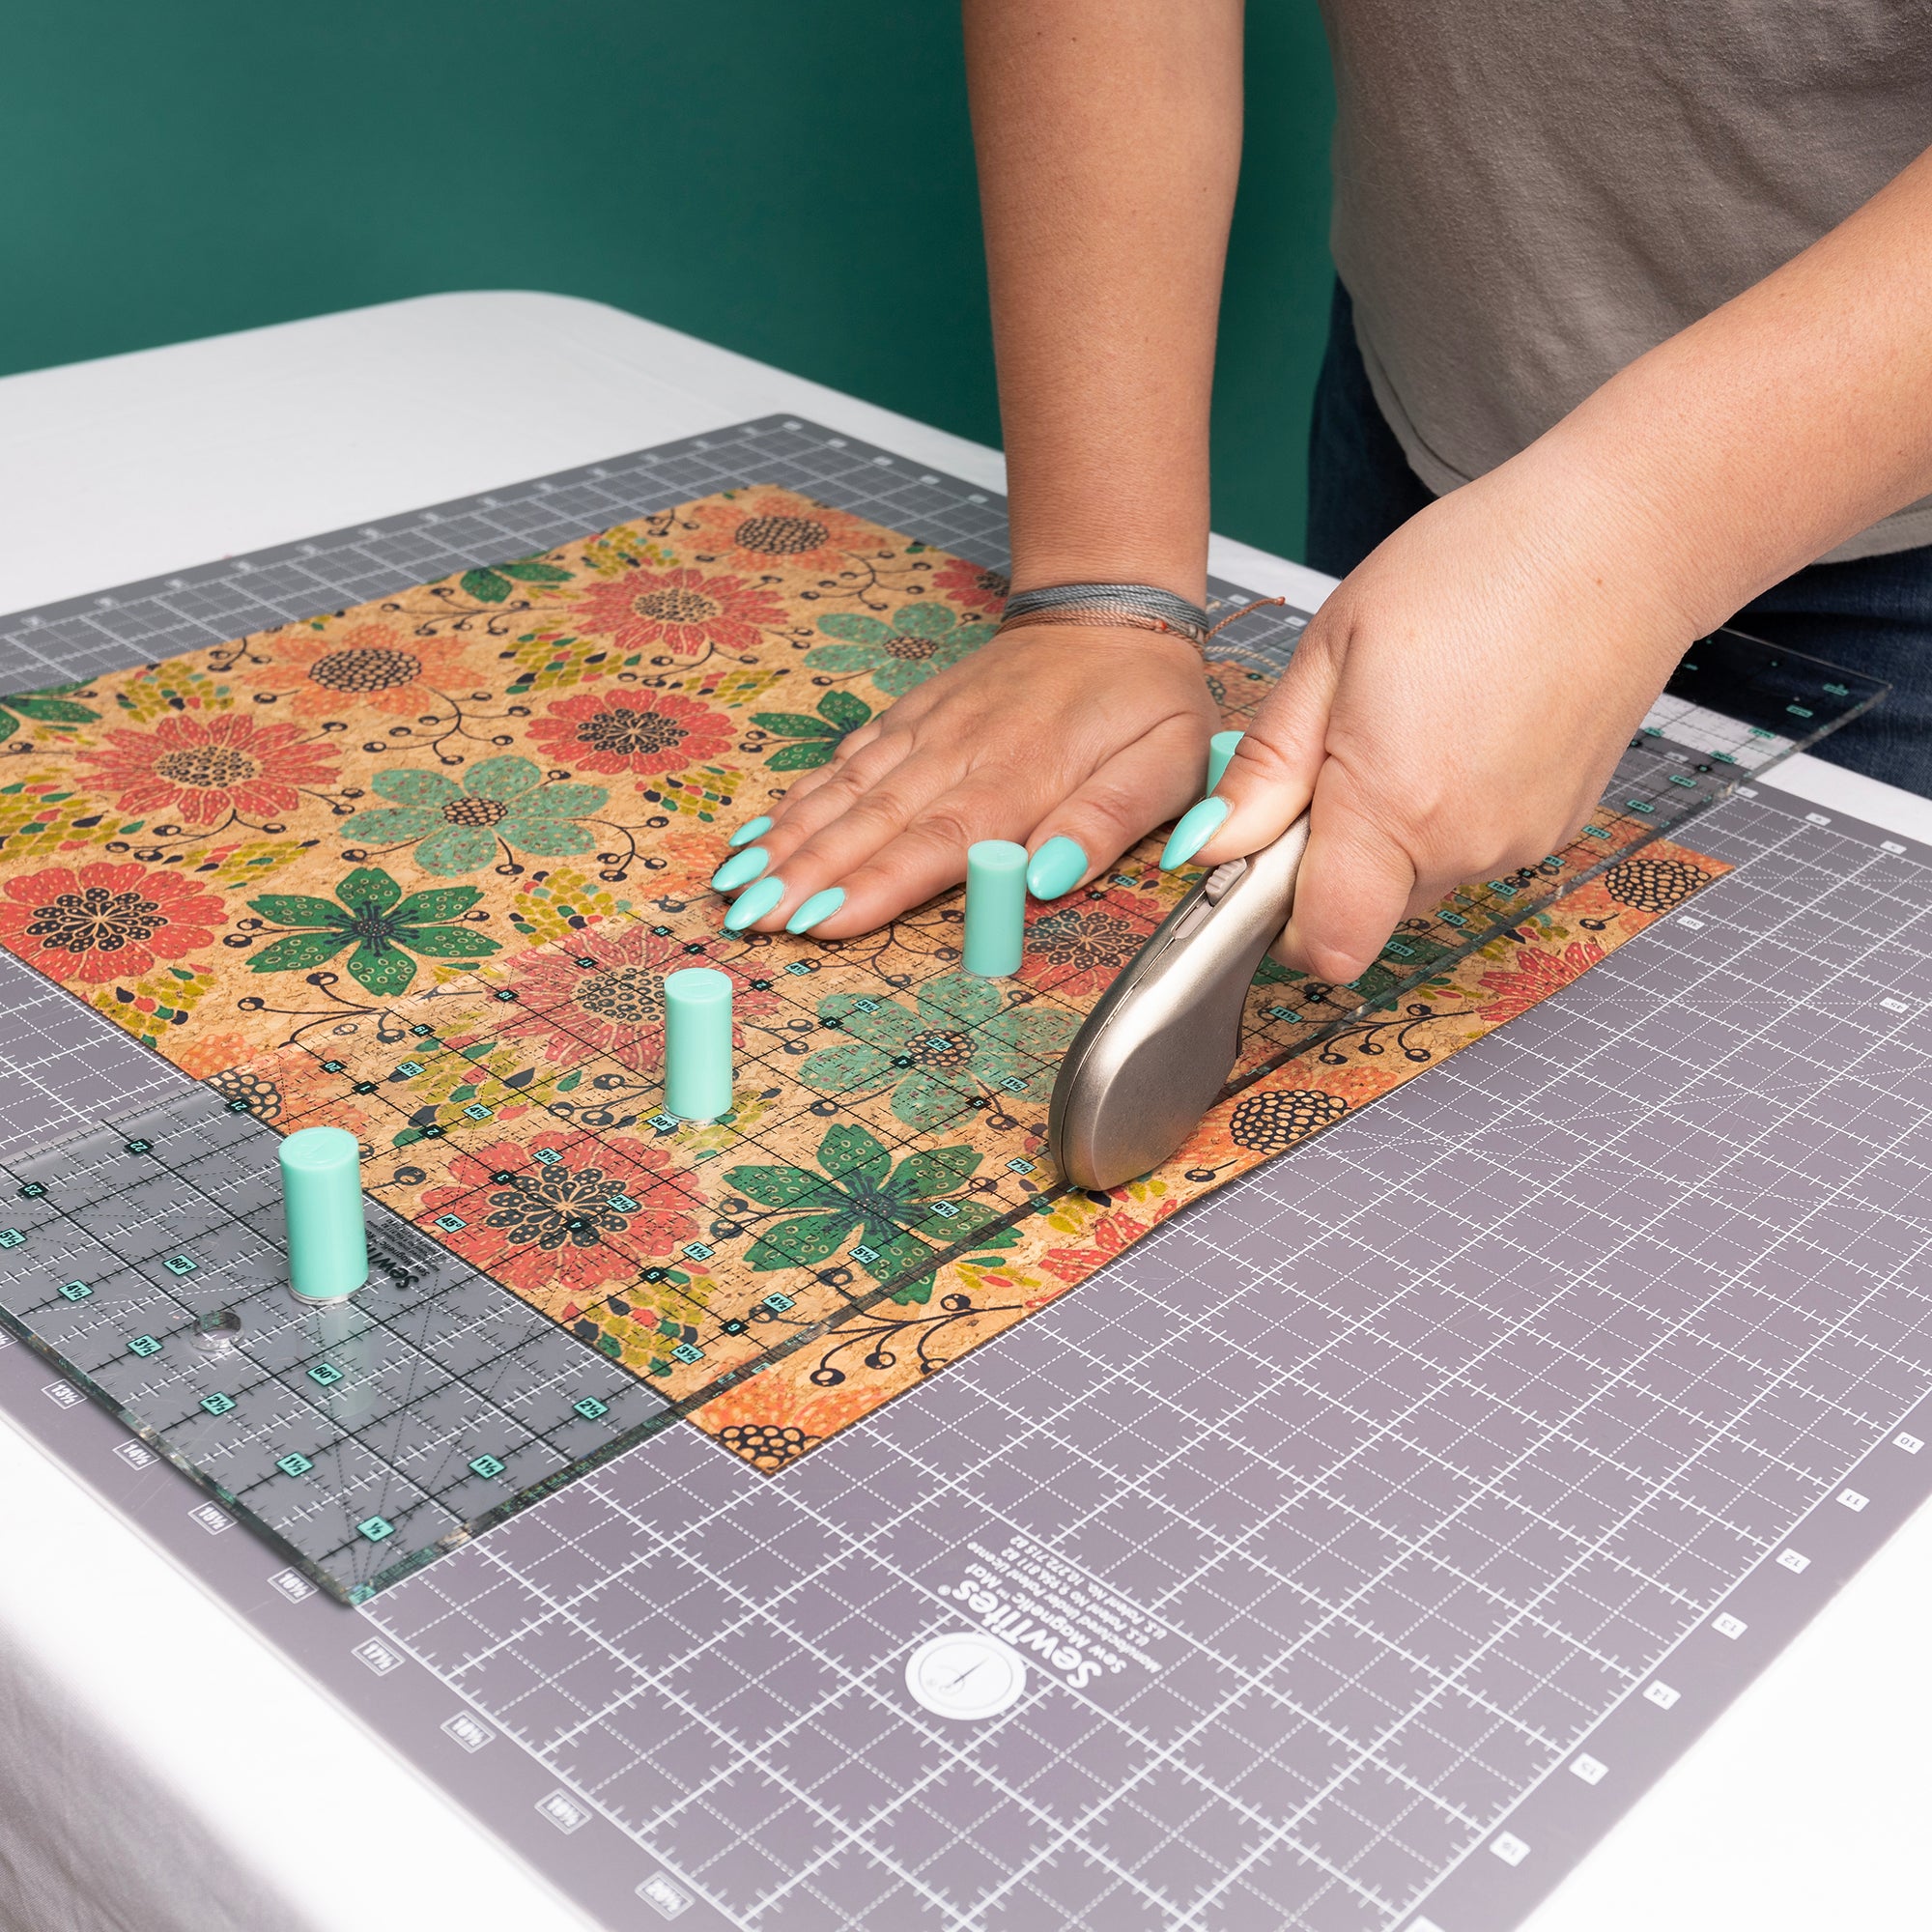 SewTites Sew Magnetic Cutting System : Sewing Parts Online